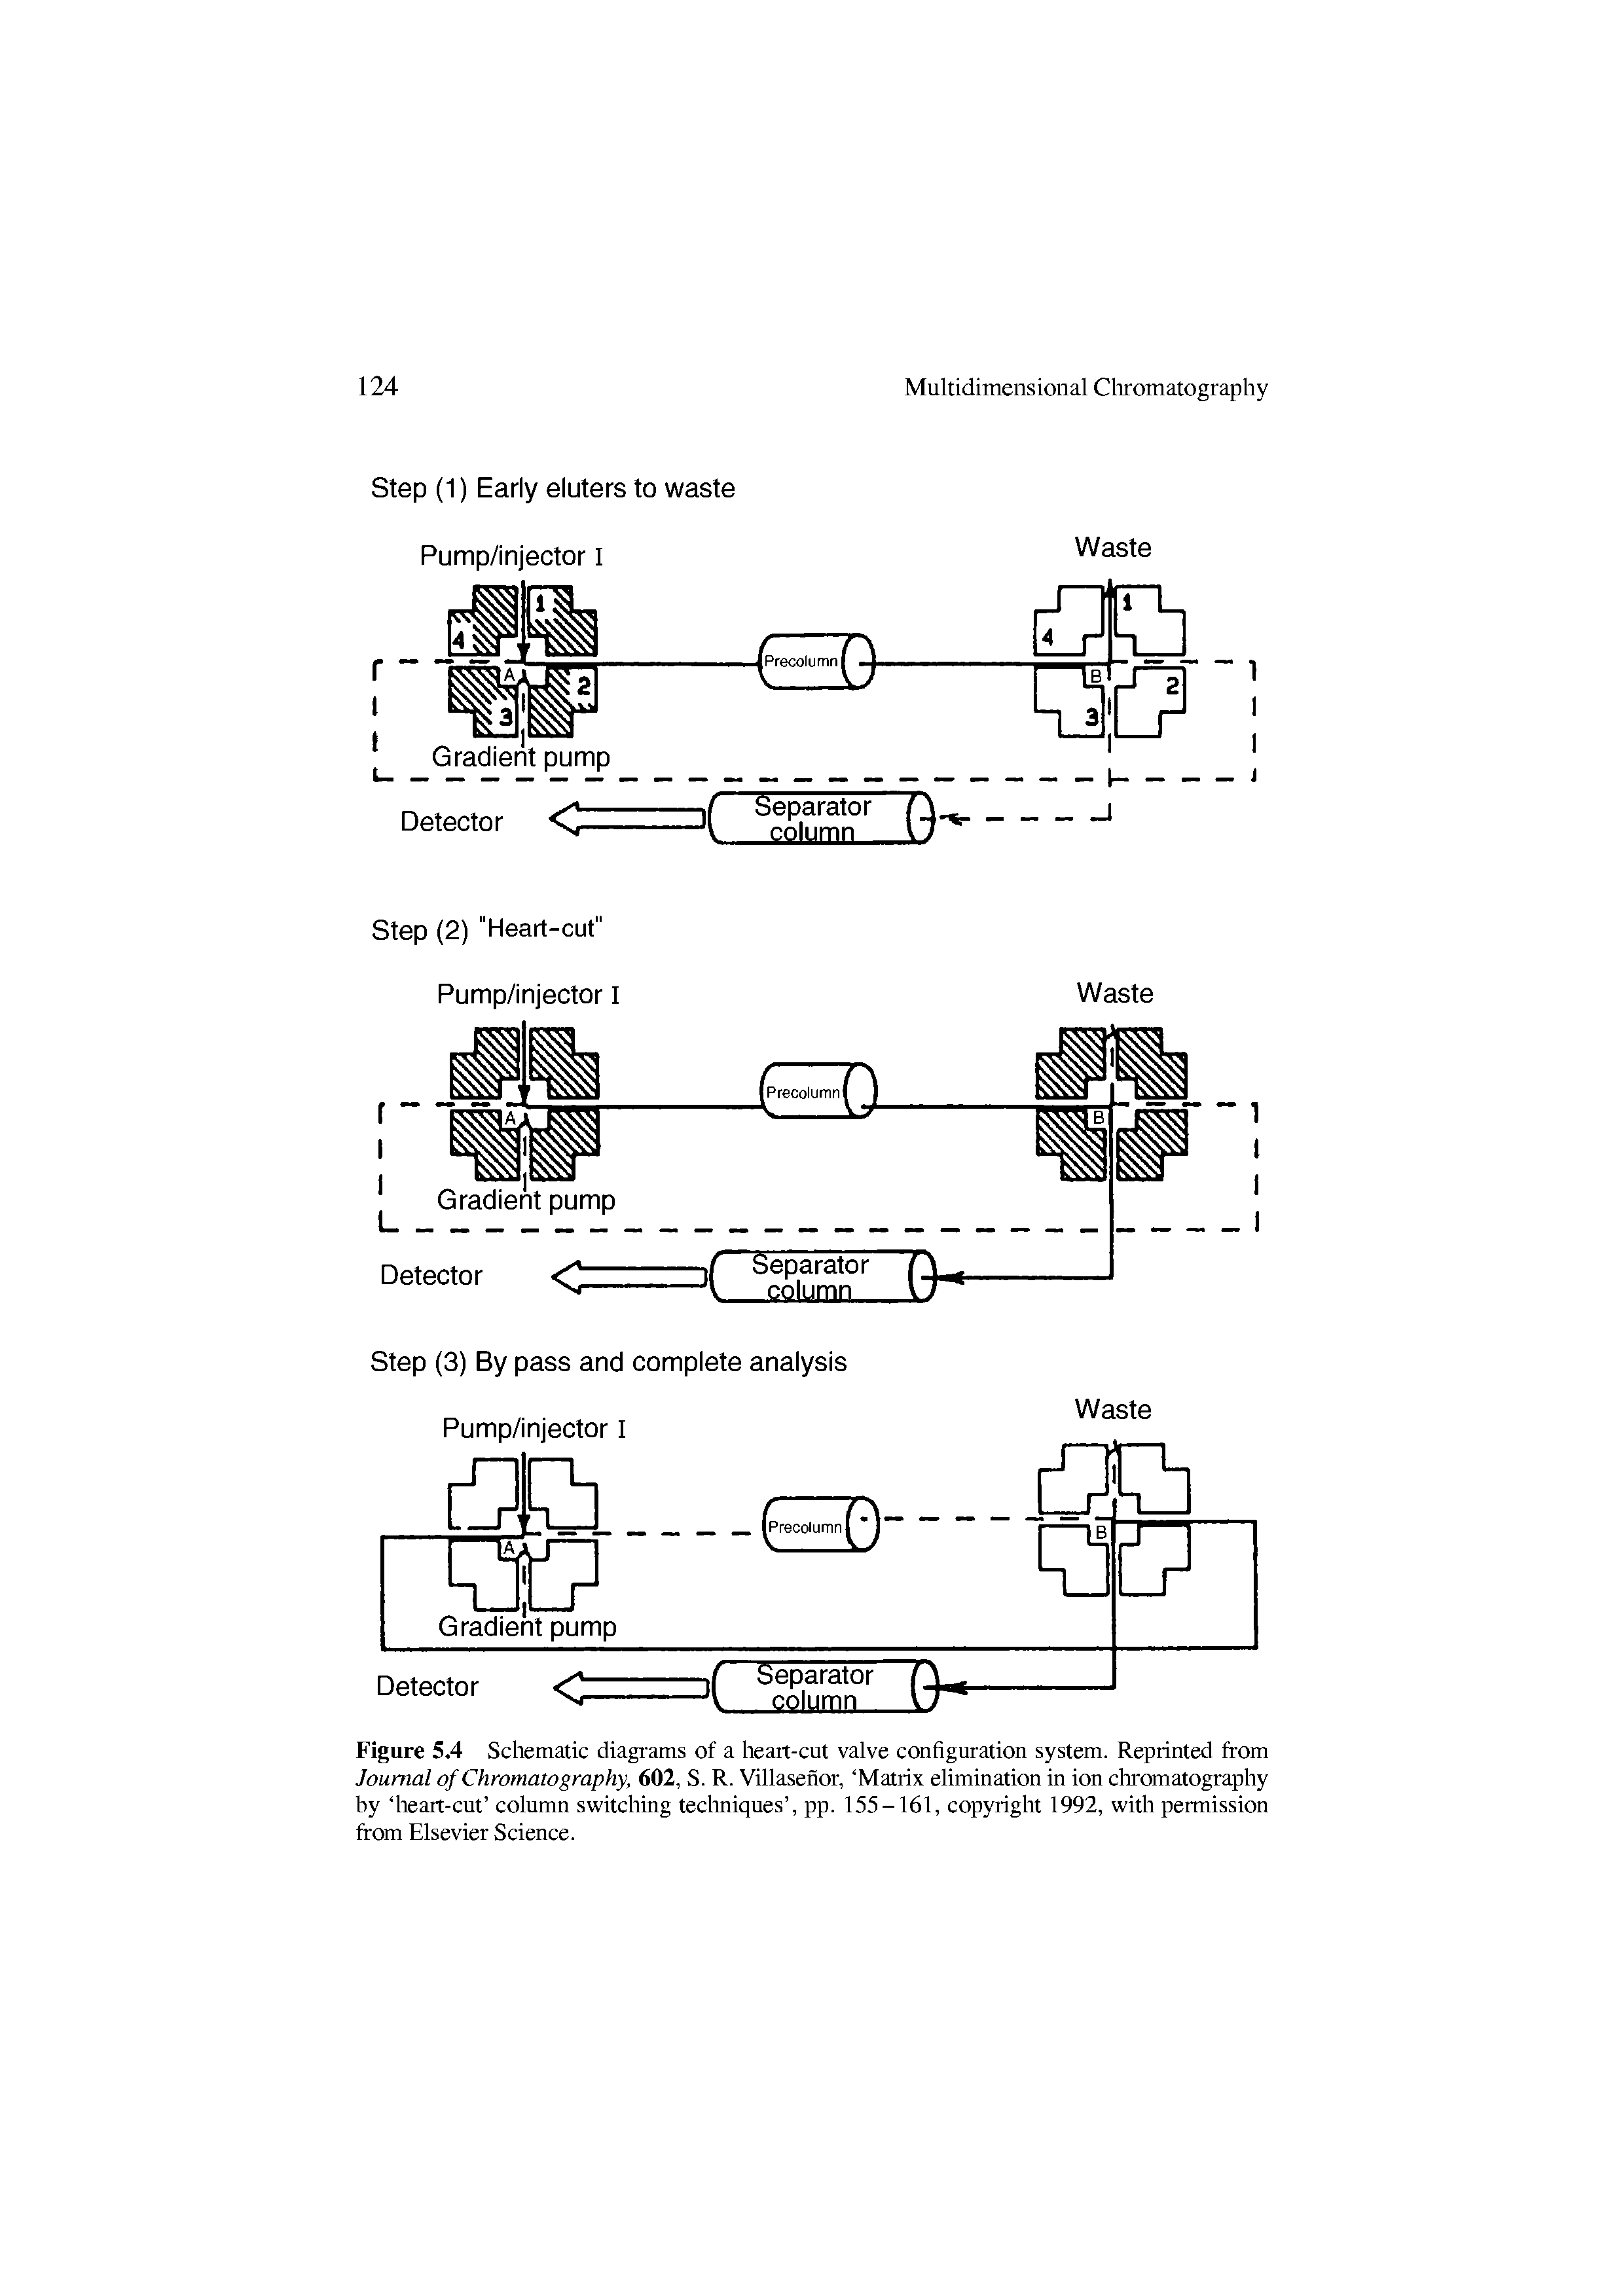 Figure 5.4 Schematic diagrams of a heait-cut valve configuration system. Reprinted from Journal of Chromatography, 602, S. R. Villasenor, Matrix elimination in ion cliromatography by heart-cut column switching techniques , pp. 155-161, copyright 1992, with permission from Elsevier Science.